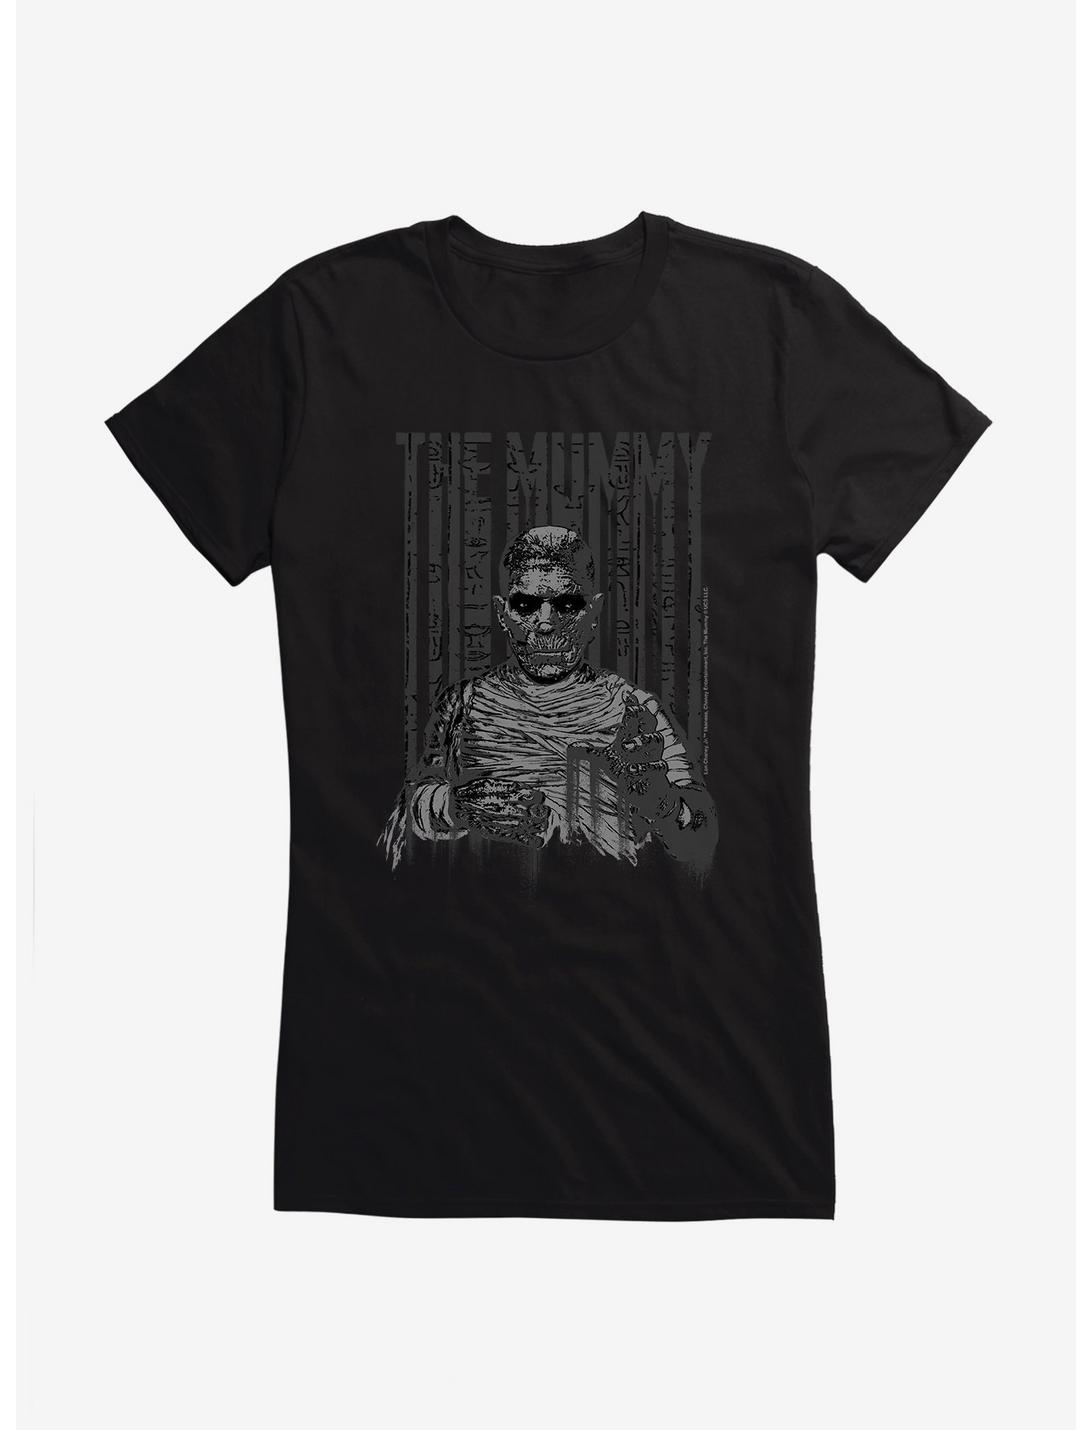 Universal Monsters The Mummy Wraps Girls T-Shirt, , hi-res